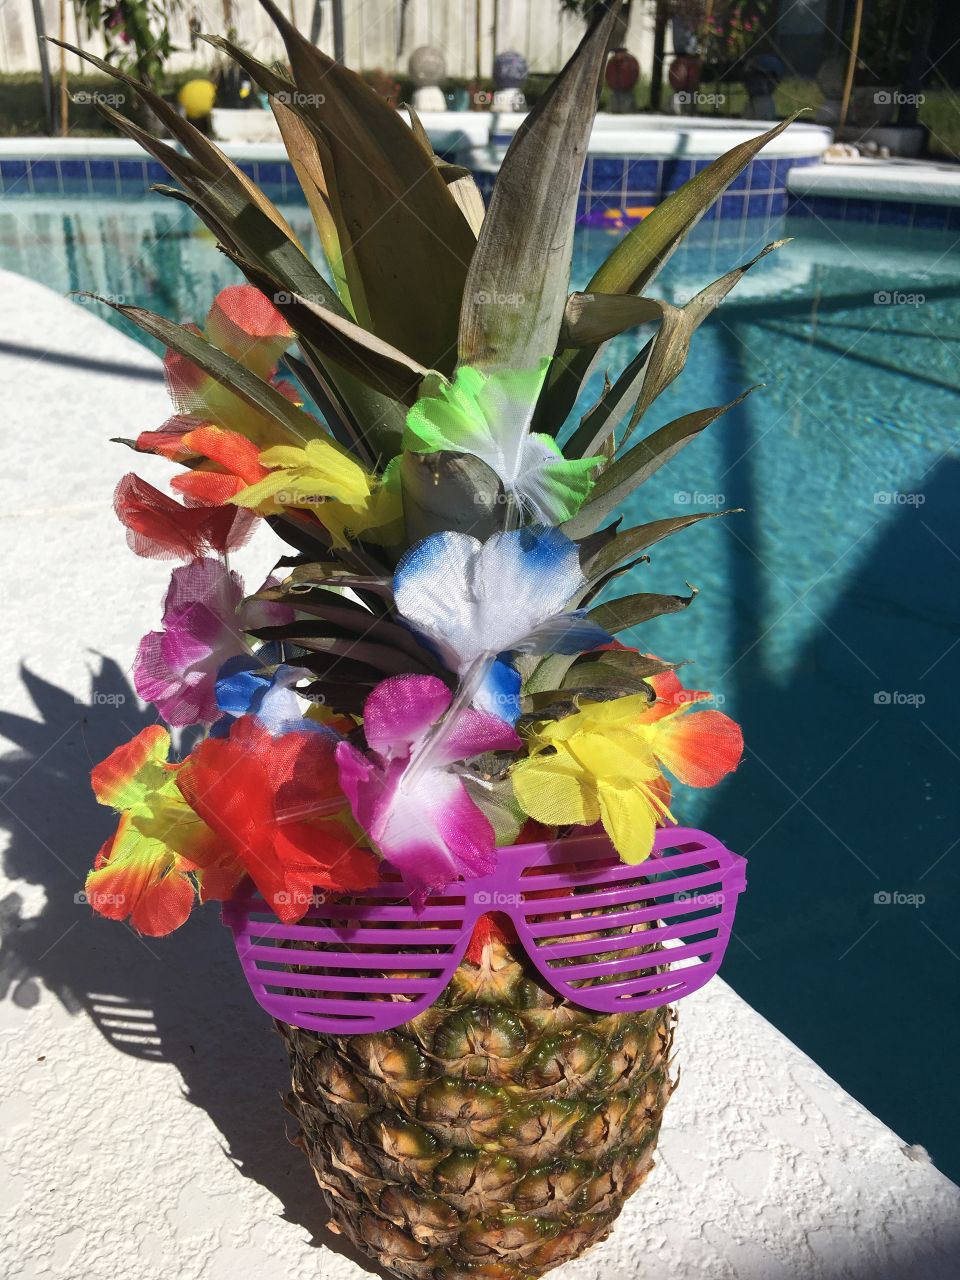 Very fashionable pineapple chilling poolside 